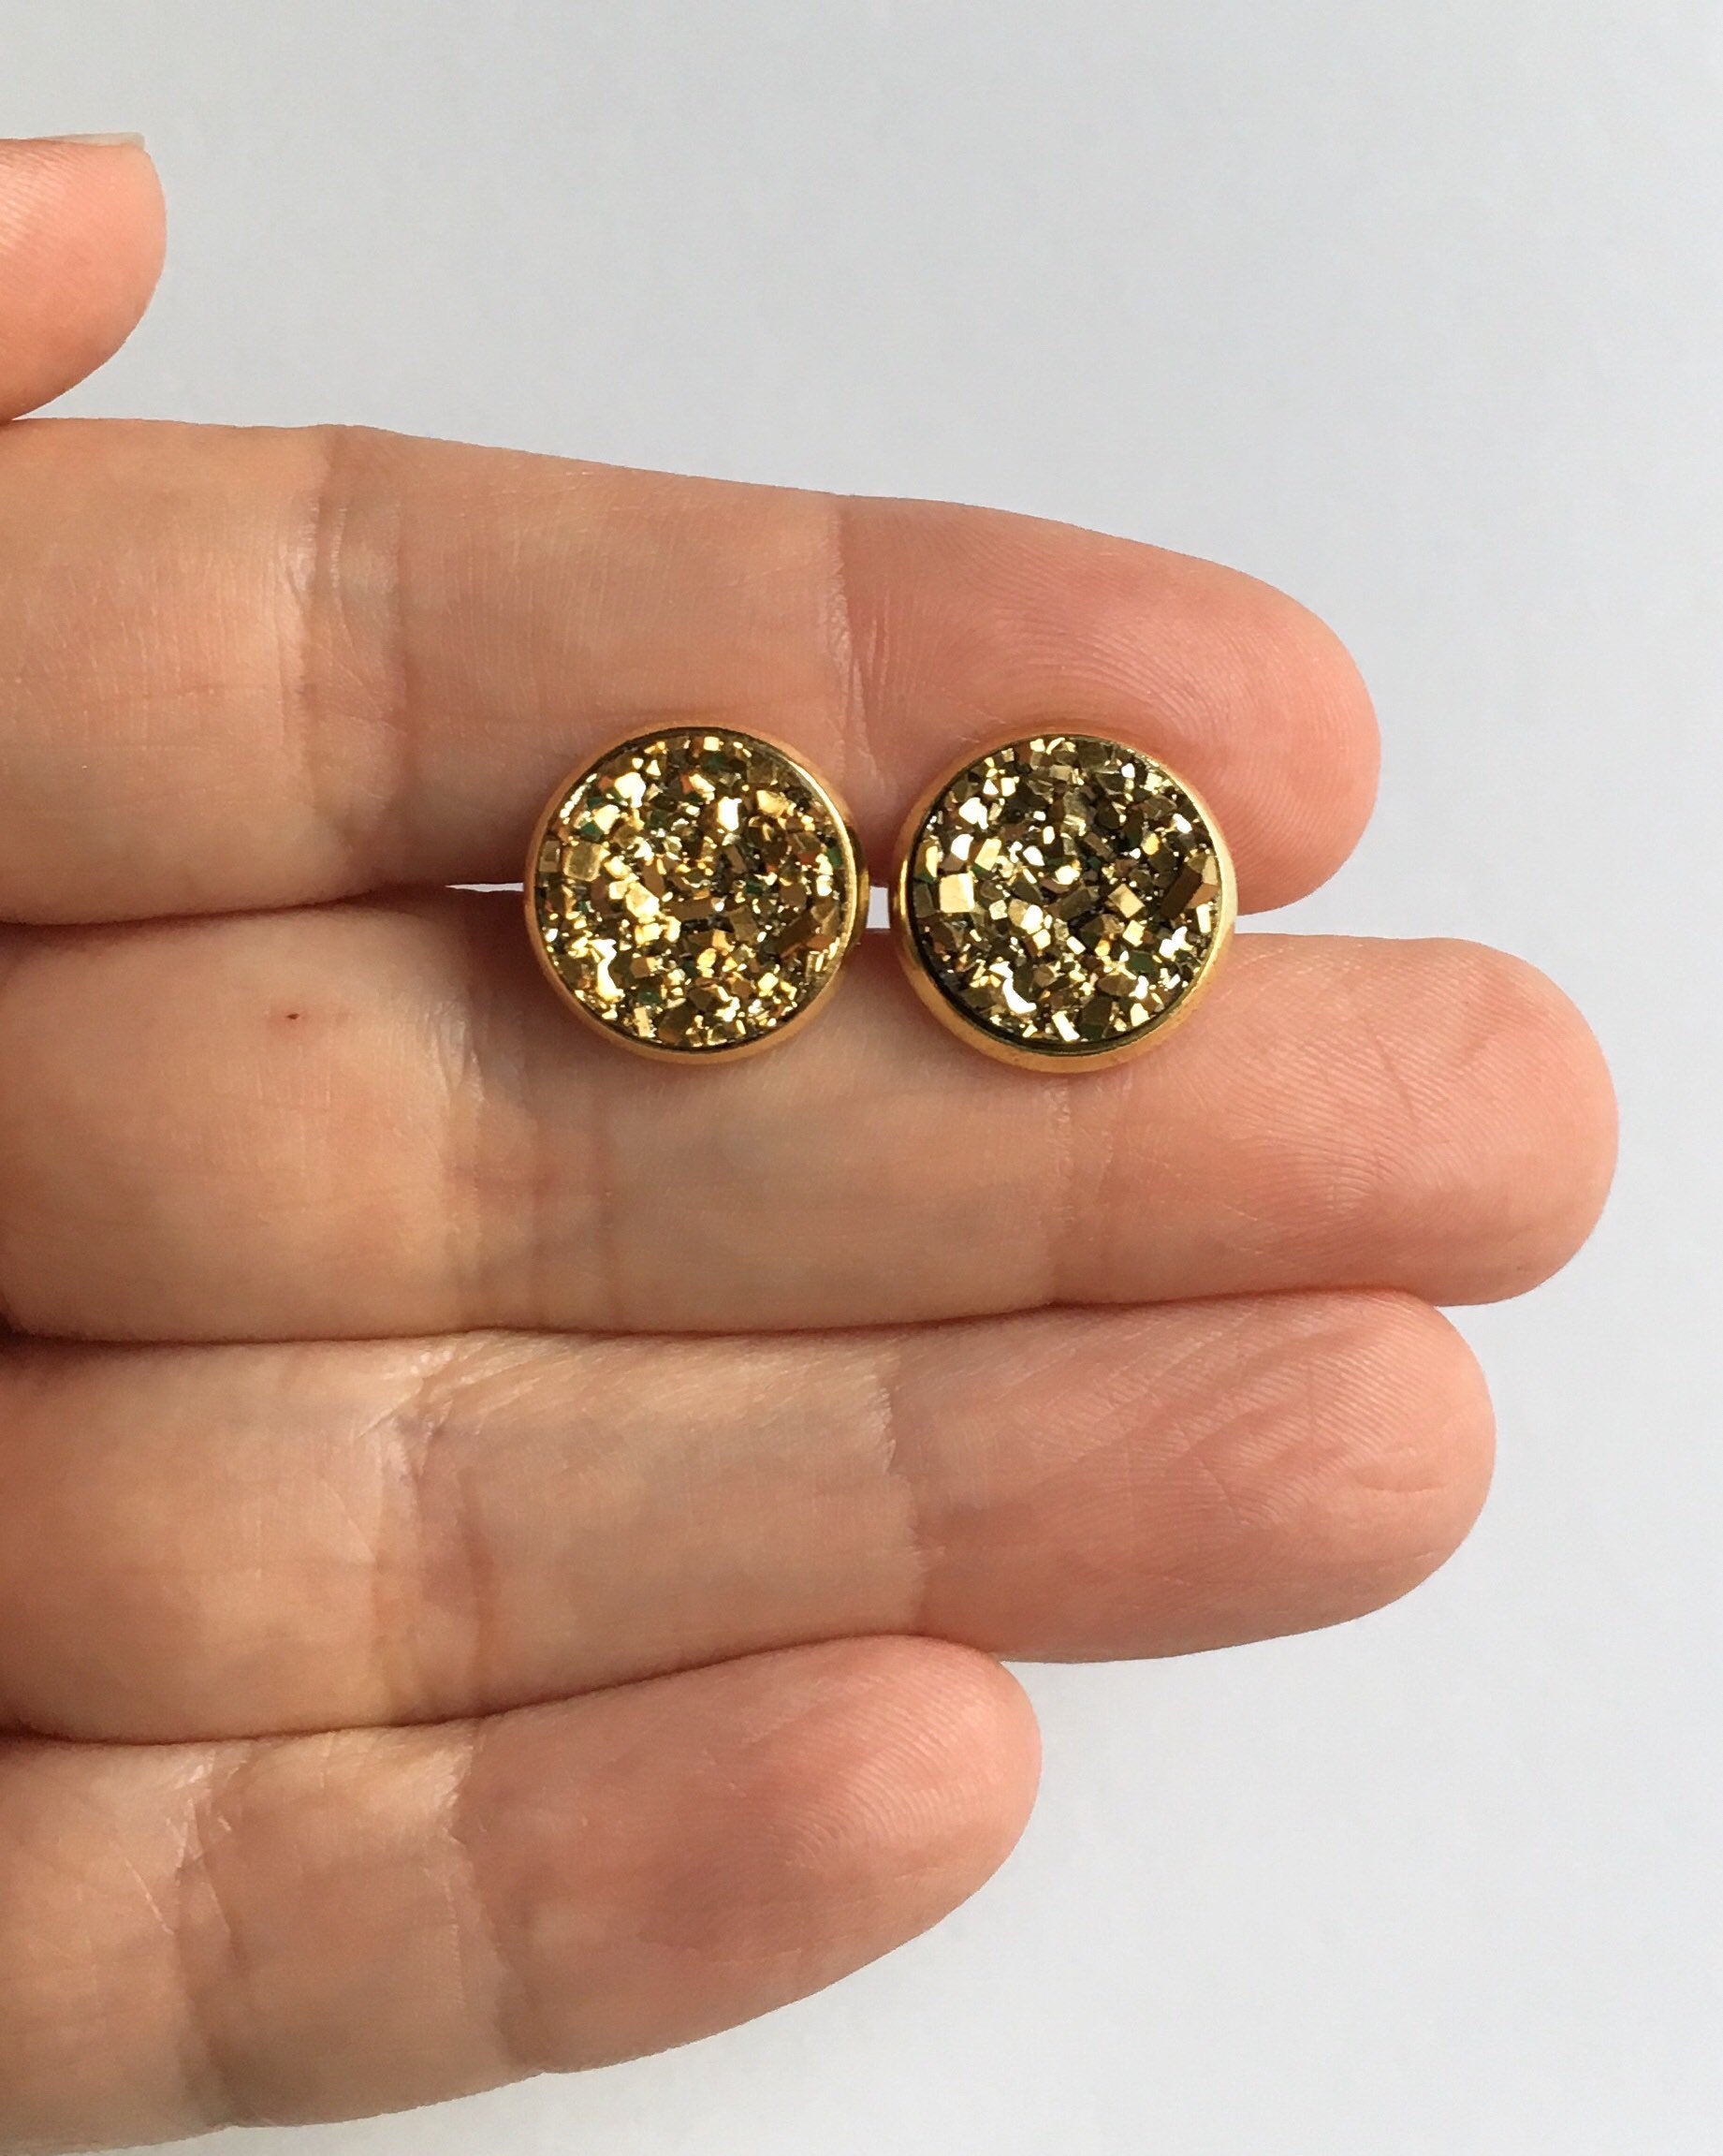 Hand holding Gold resin druzy stone stud earrings is set in a yellow gold color setting between fingers